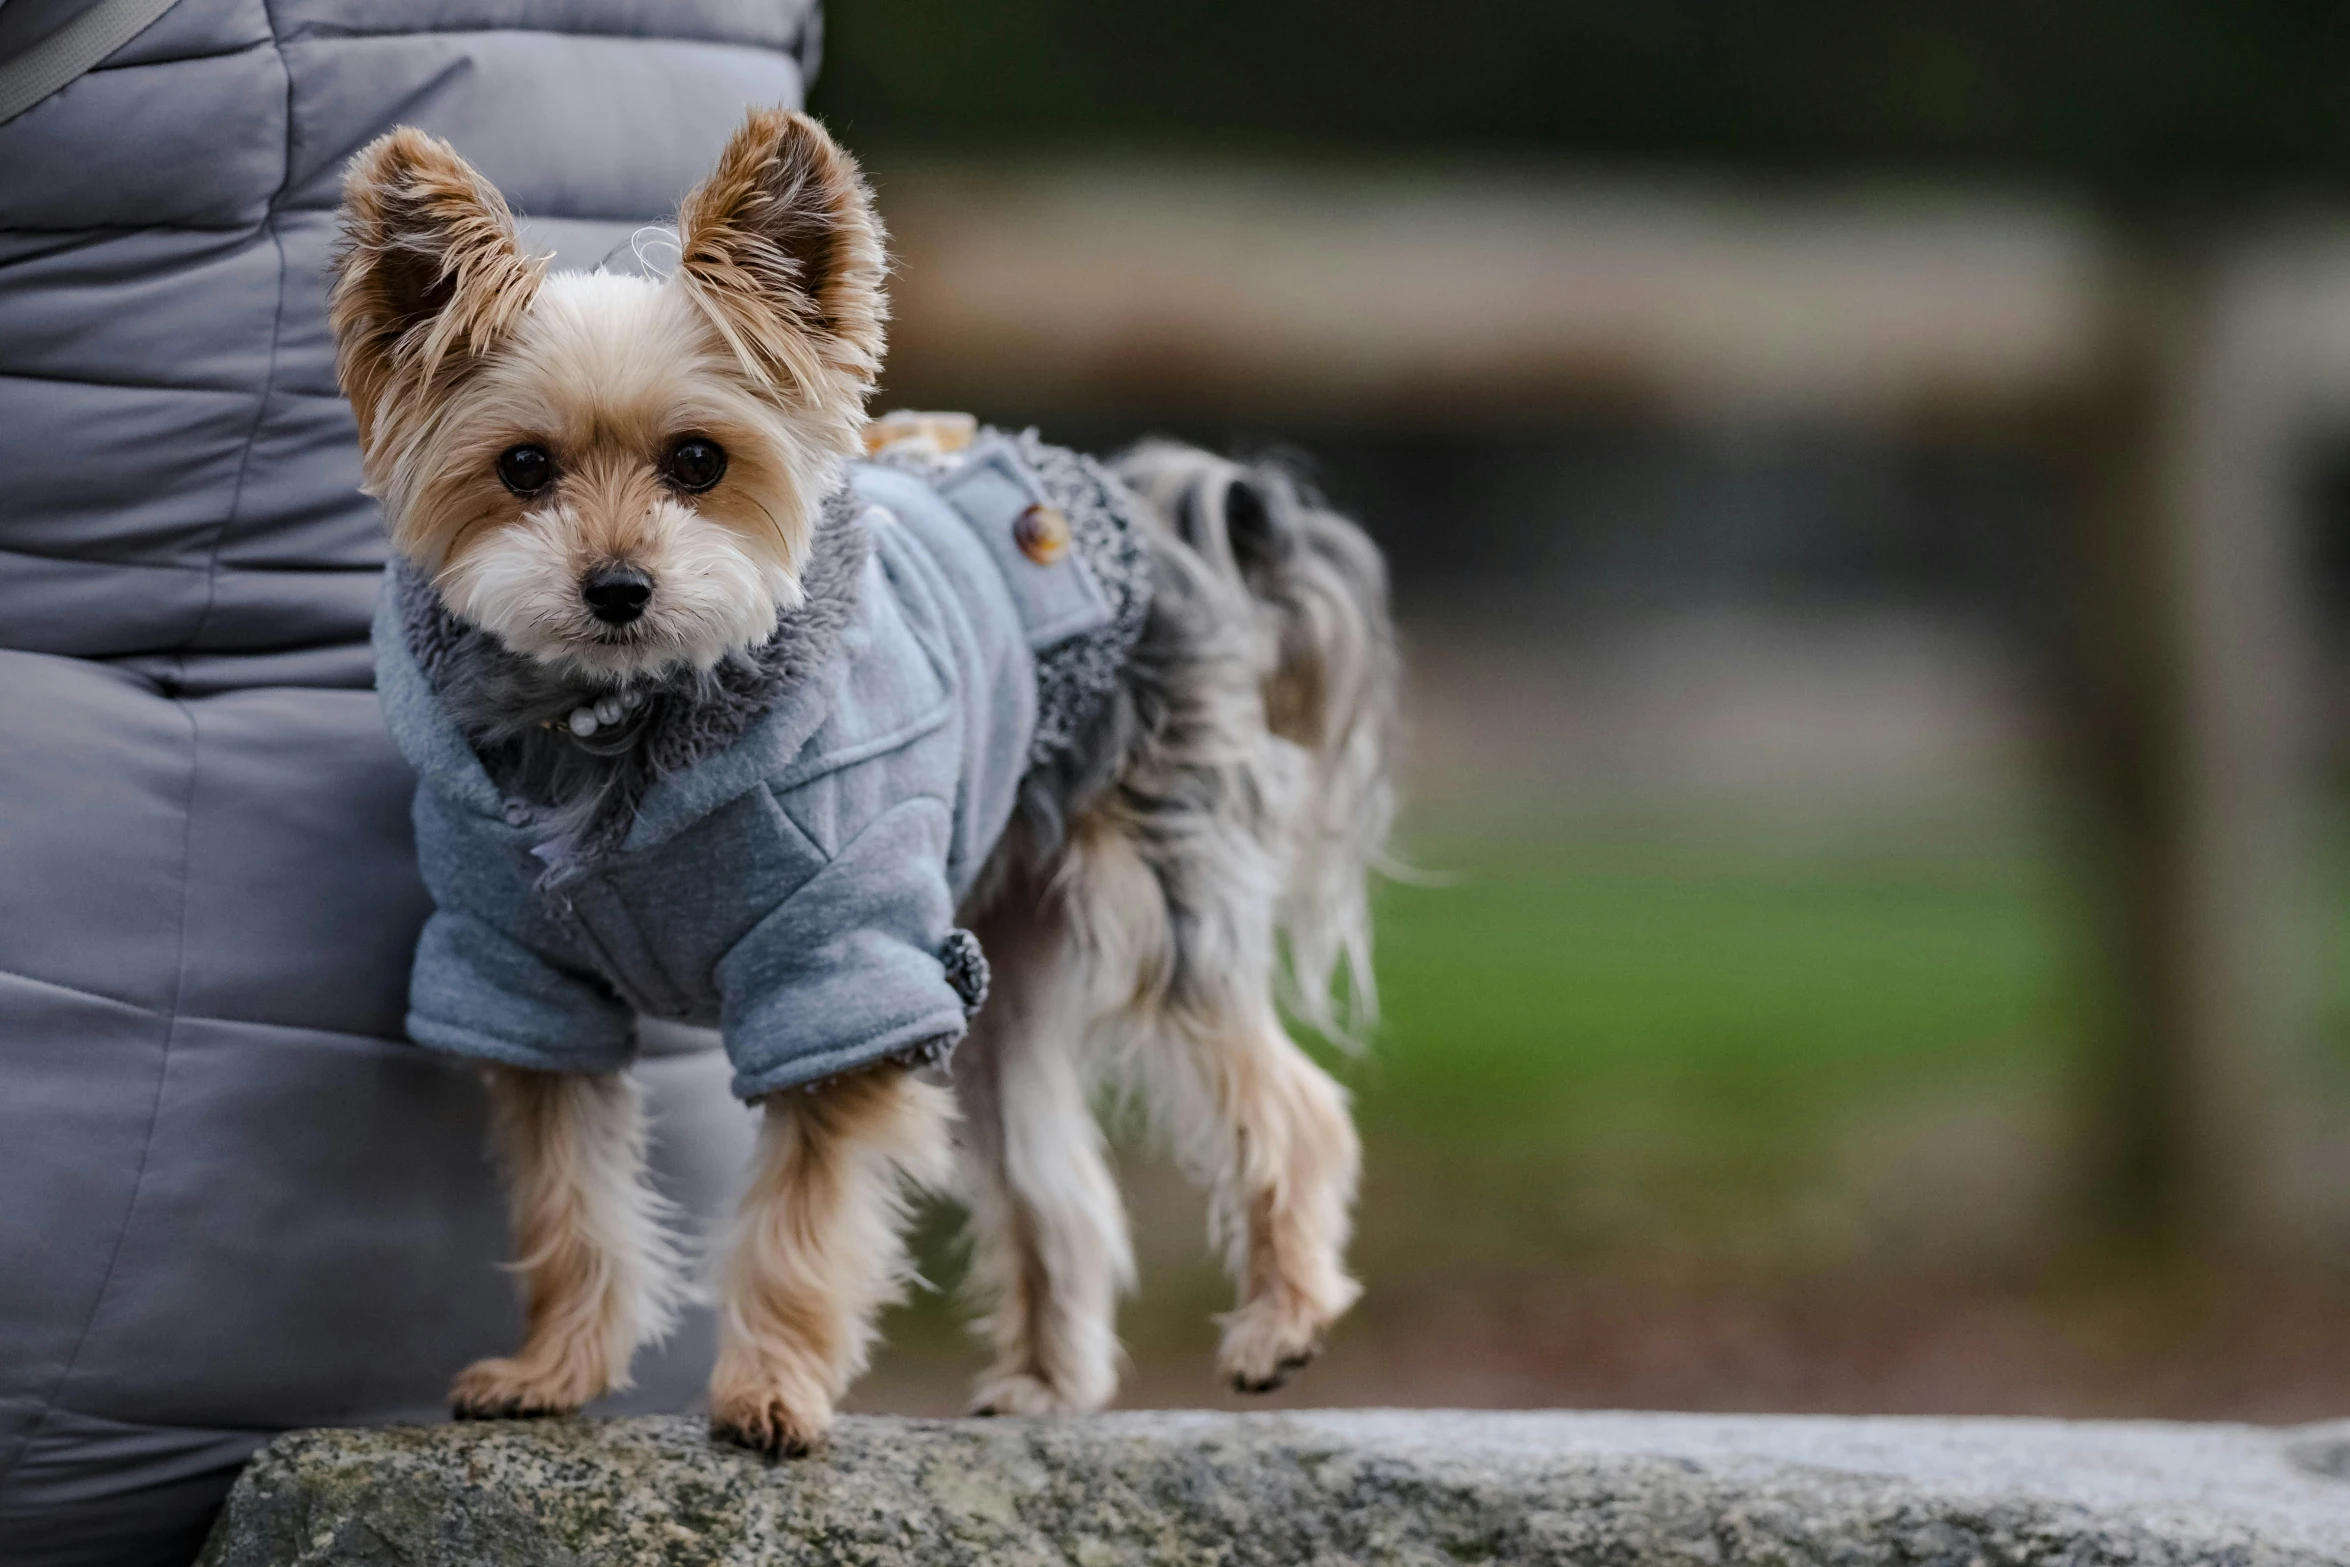 a small dog with a gray jacket standing in front of a person